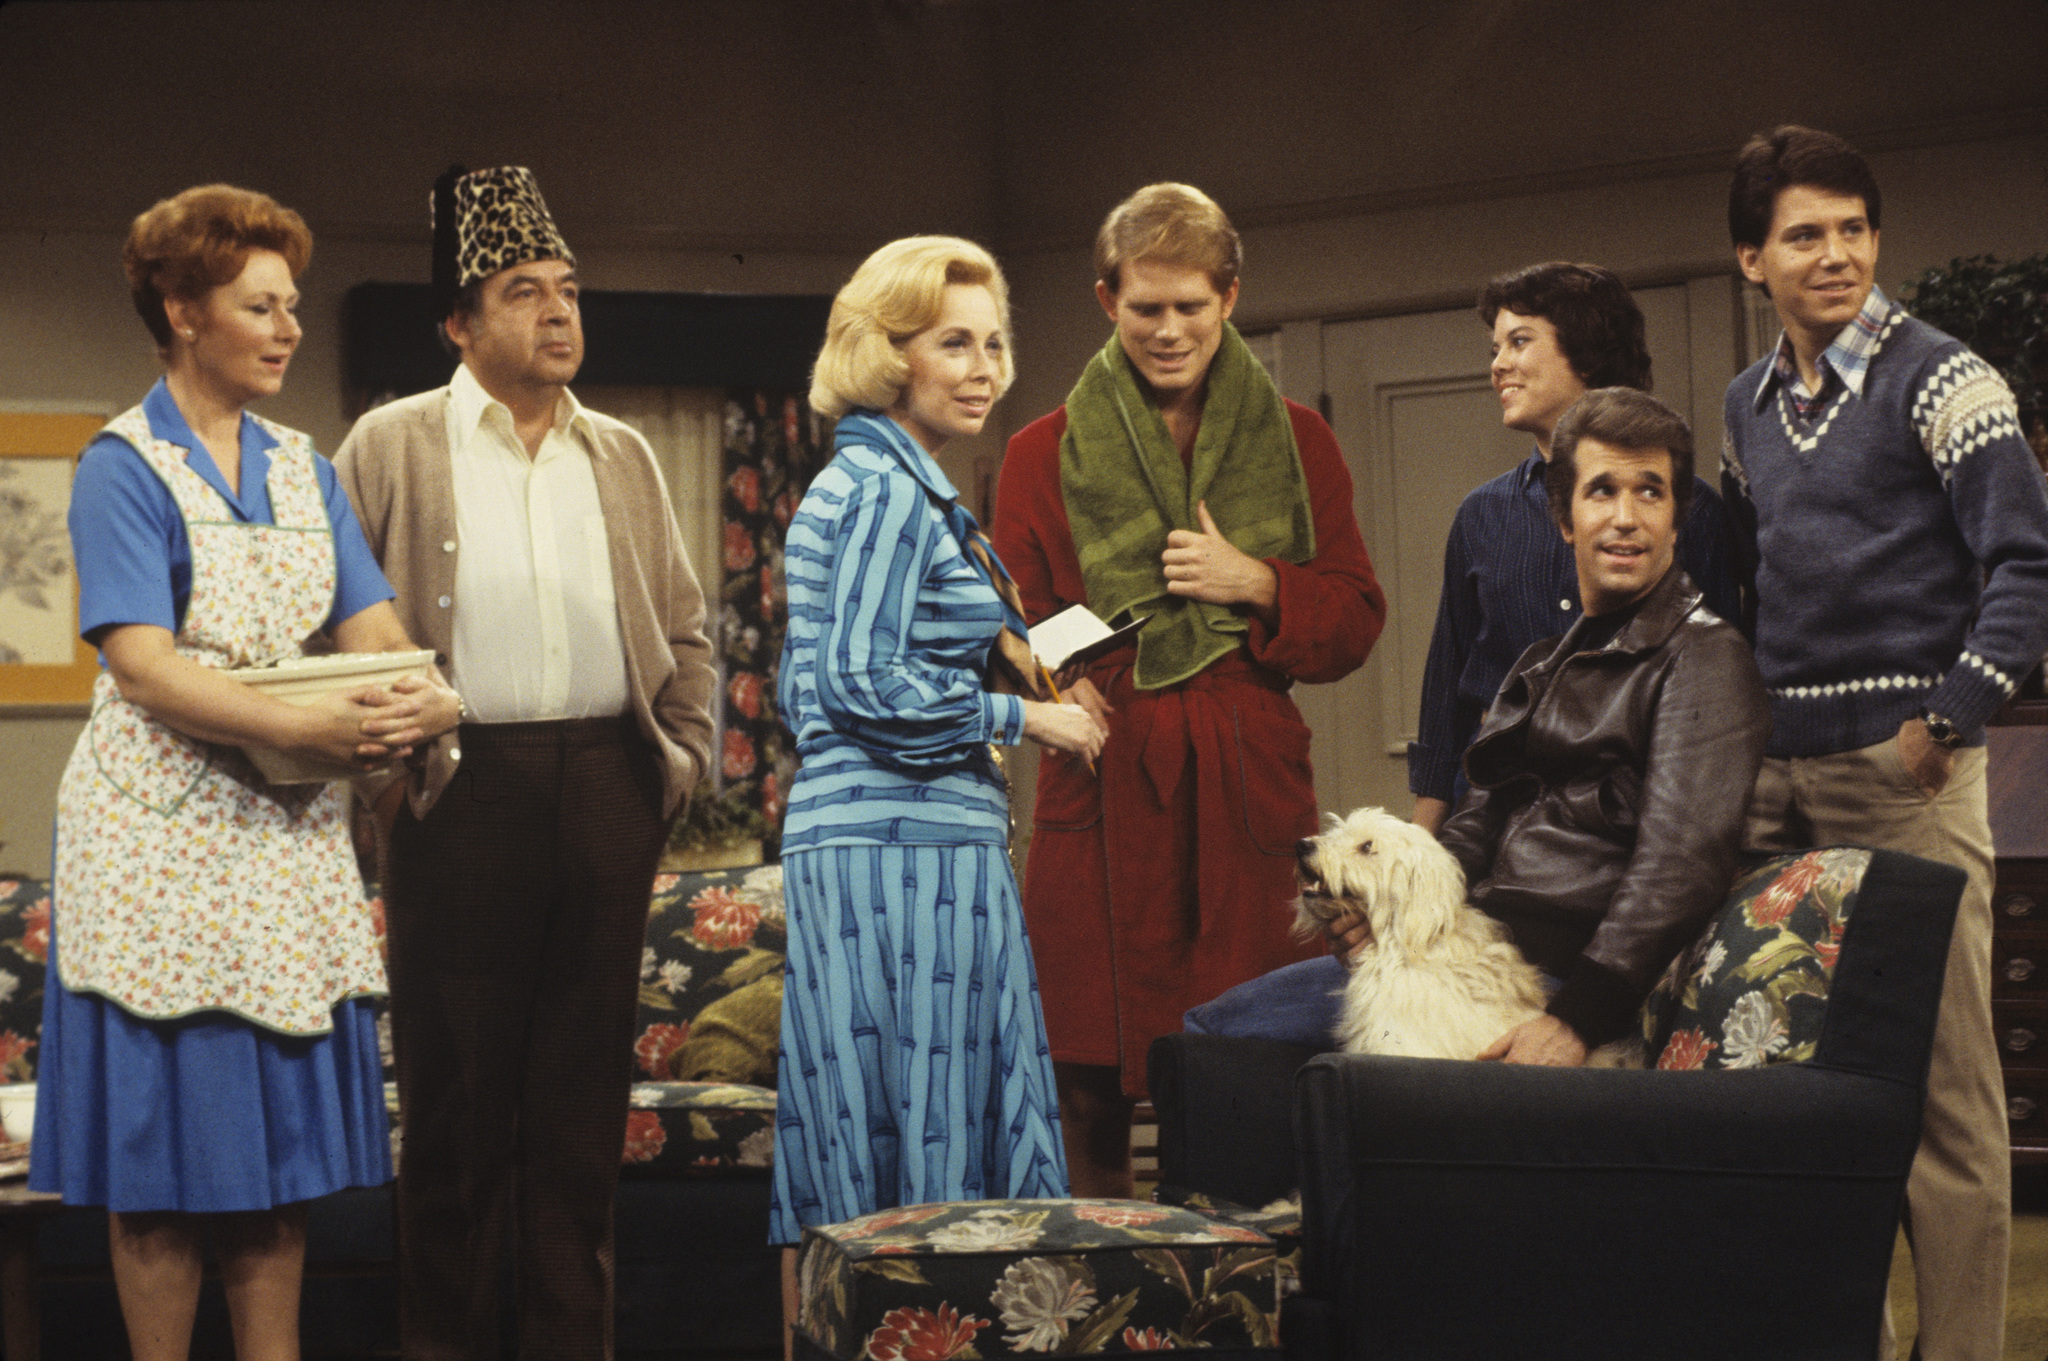 Ron Howard, Henry Winkler, Marion Ross, Tom Bosley, Joyce Brothers, Erin Moran and Anson Williams at event of Happy Days (1974)